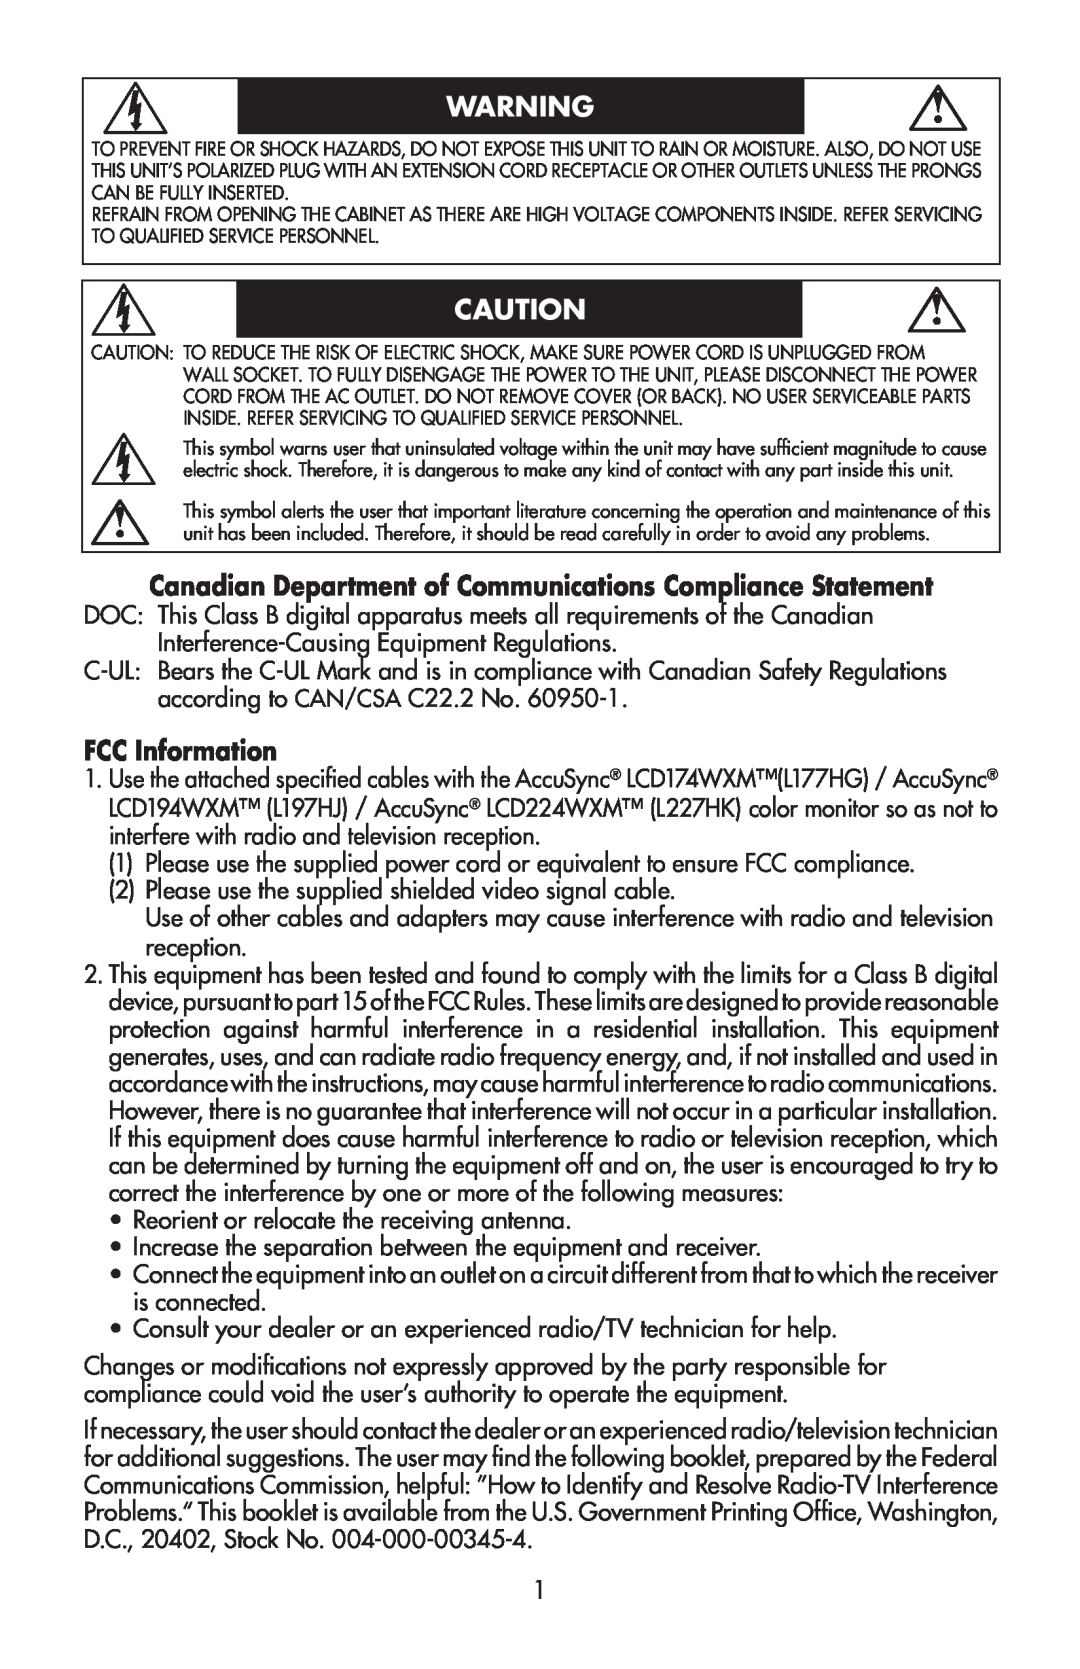 NEC LCD224WXM, LCD174WXM, LCD194WXM user manual Canadian Department of Communications Compliance Statement, FCC Information 